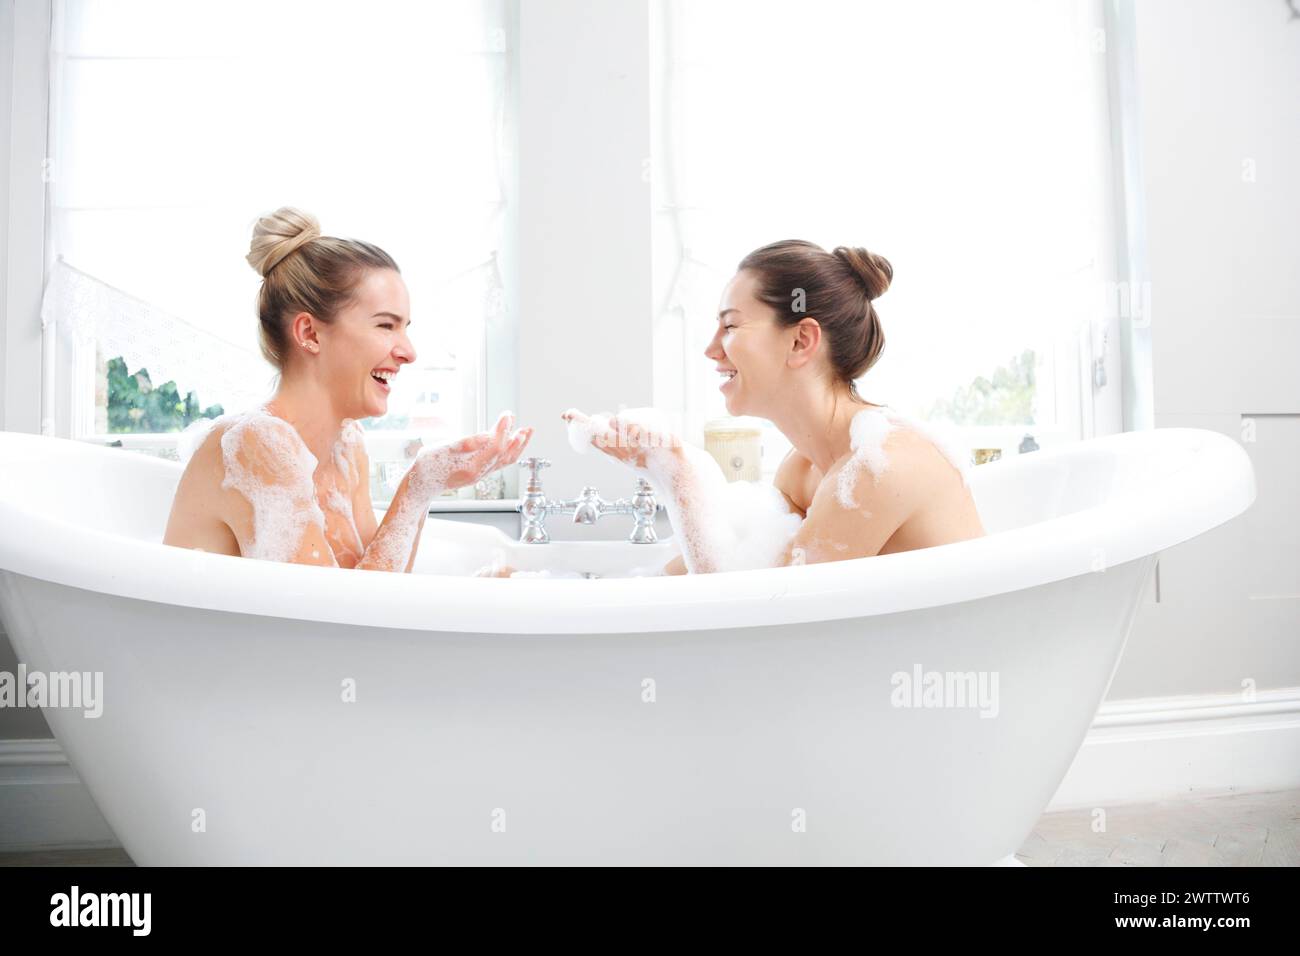 Two women laughing in a bubble bath Stock Photo